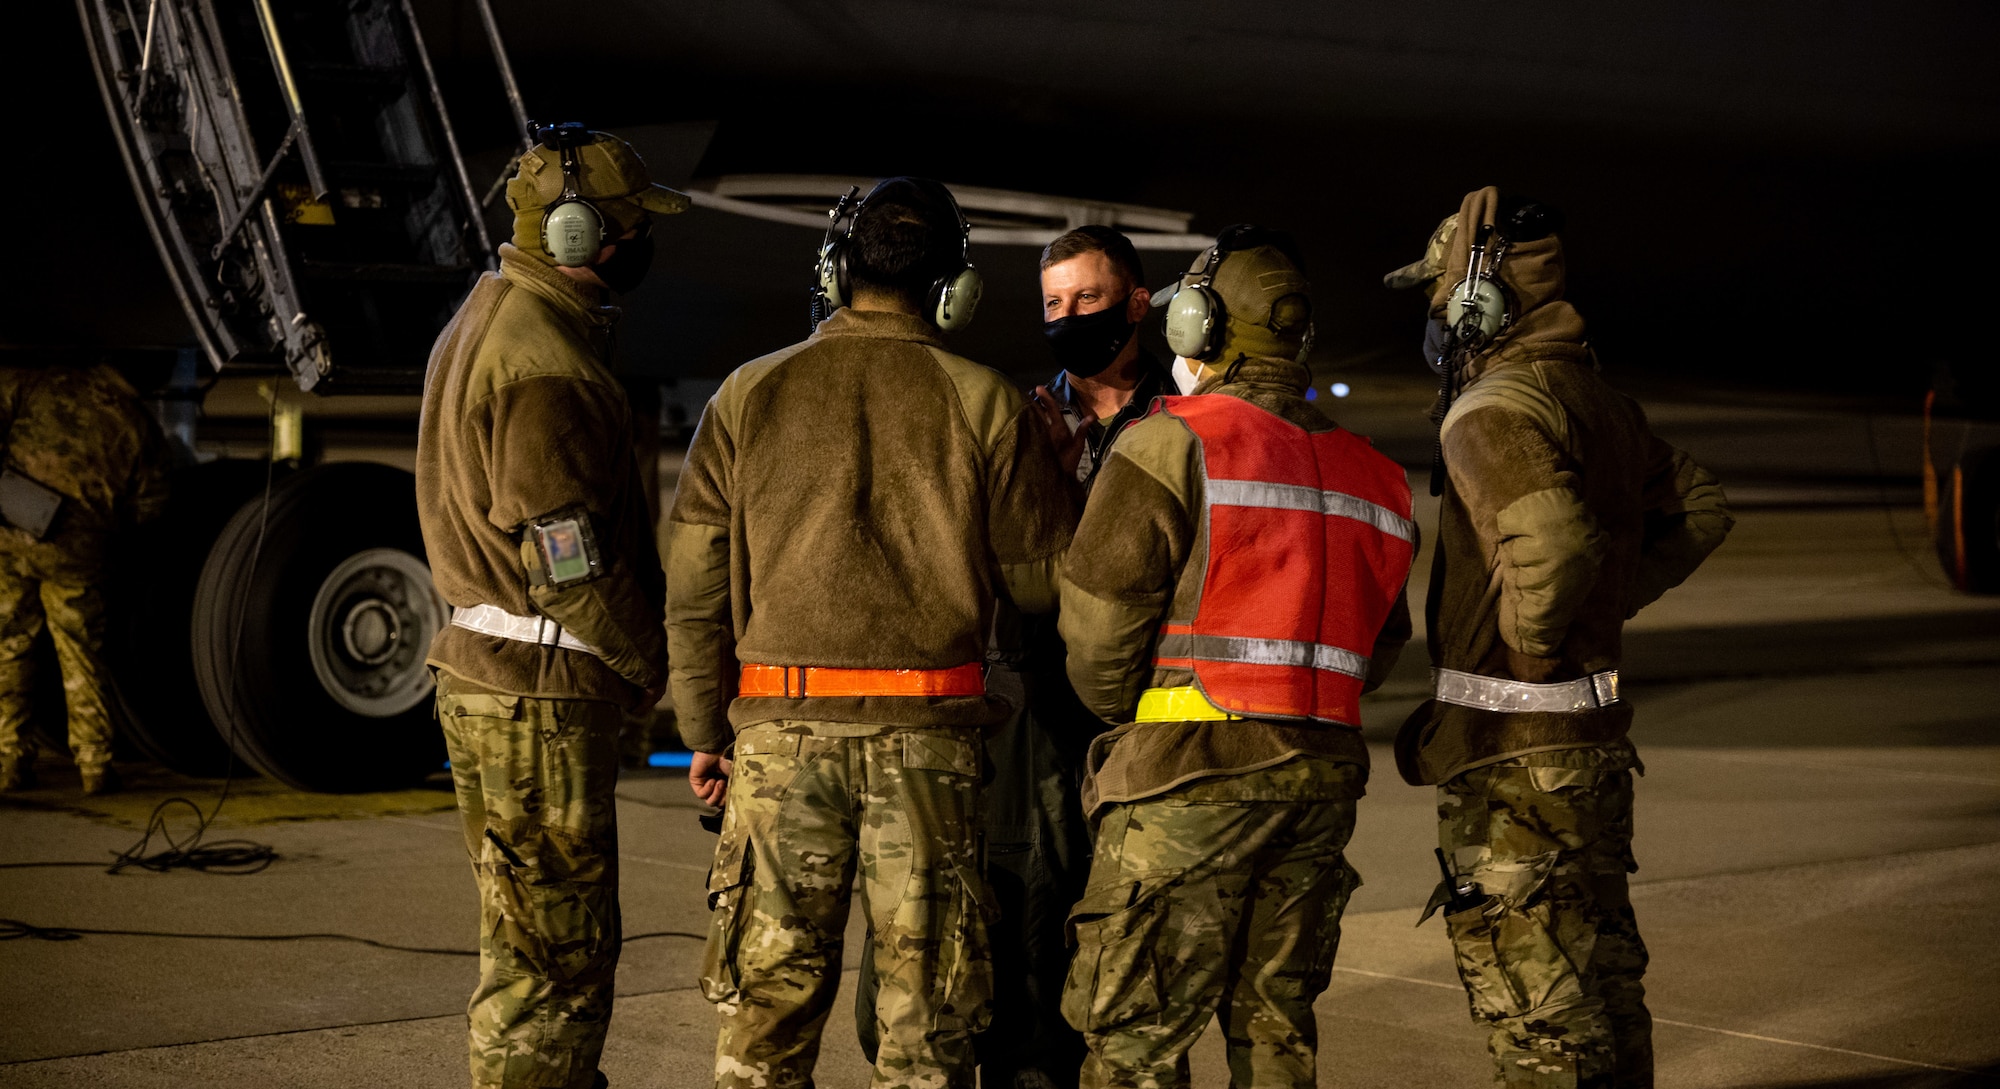 Col. Matthew Jones, 436th Airlift Wing commander, talks with Airmen from the  436th Aircraft Maintenance Squadron after completing a training sortie on Jan. 19, 2021, at Dover Air Force Base, Delaware. Dover AFB supports 20 percent of the nation’s strategic airlift and routinely flies local training missions to sustain mission readiness for global operations. (U.S. Air Force photo by Airman 1st Class Faith Schaefer)